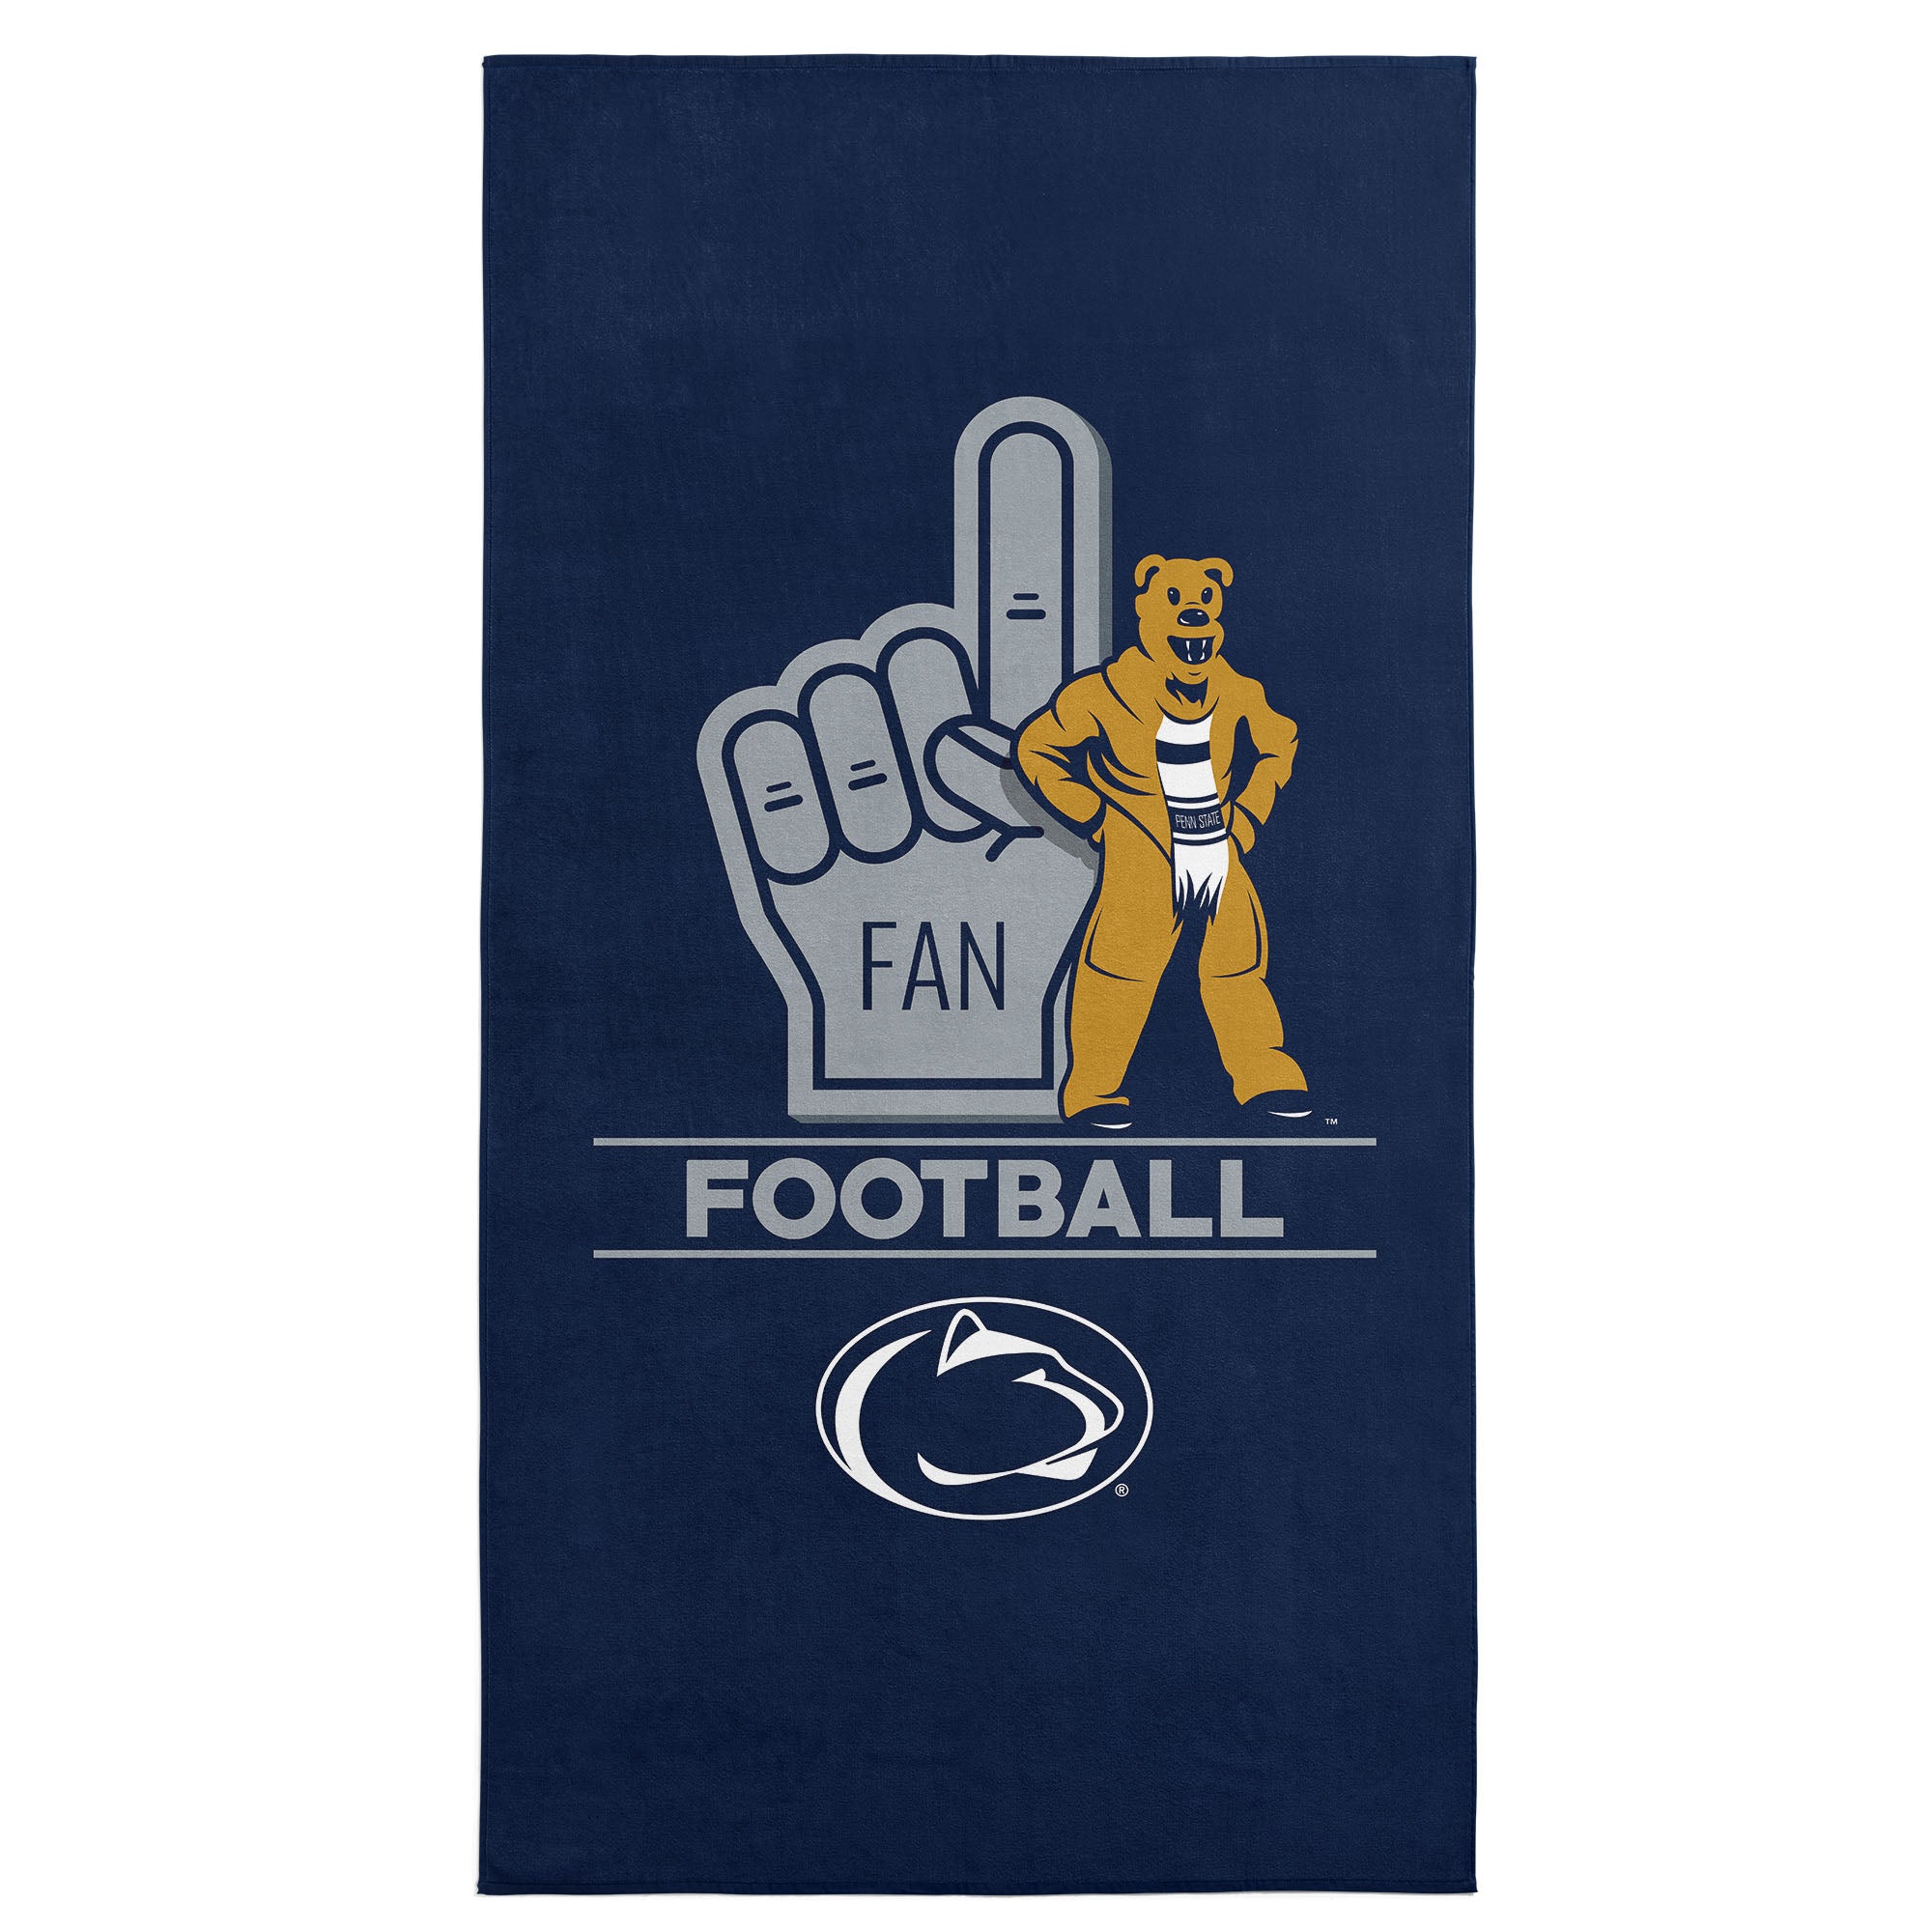 NCAA Penn State Nittany Lions Number 1 Fan Beach Towel 30x60 Inches